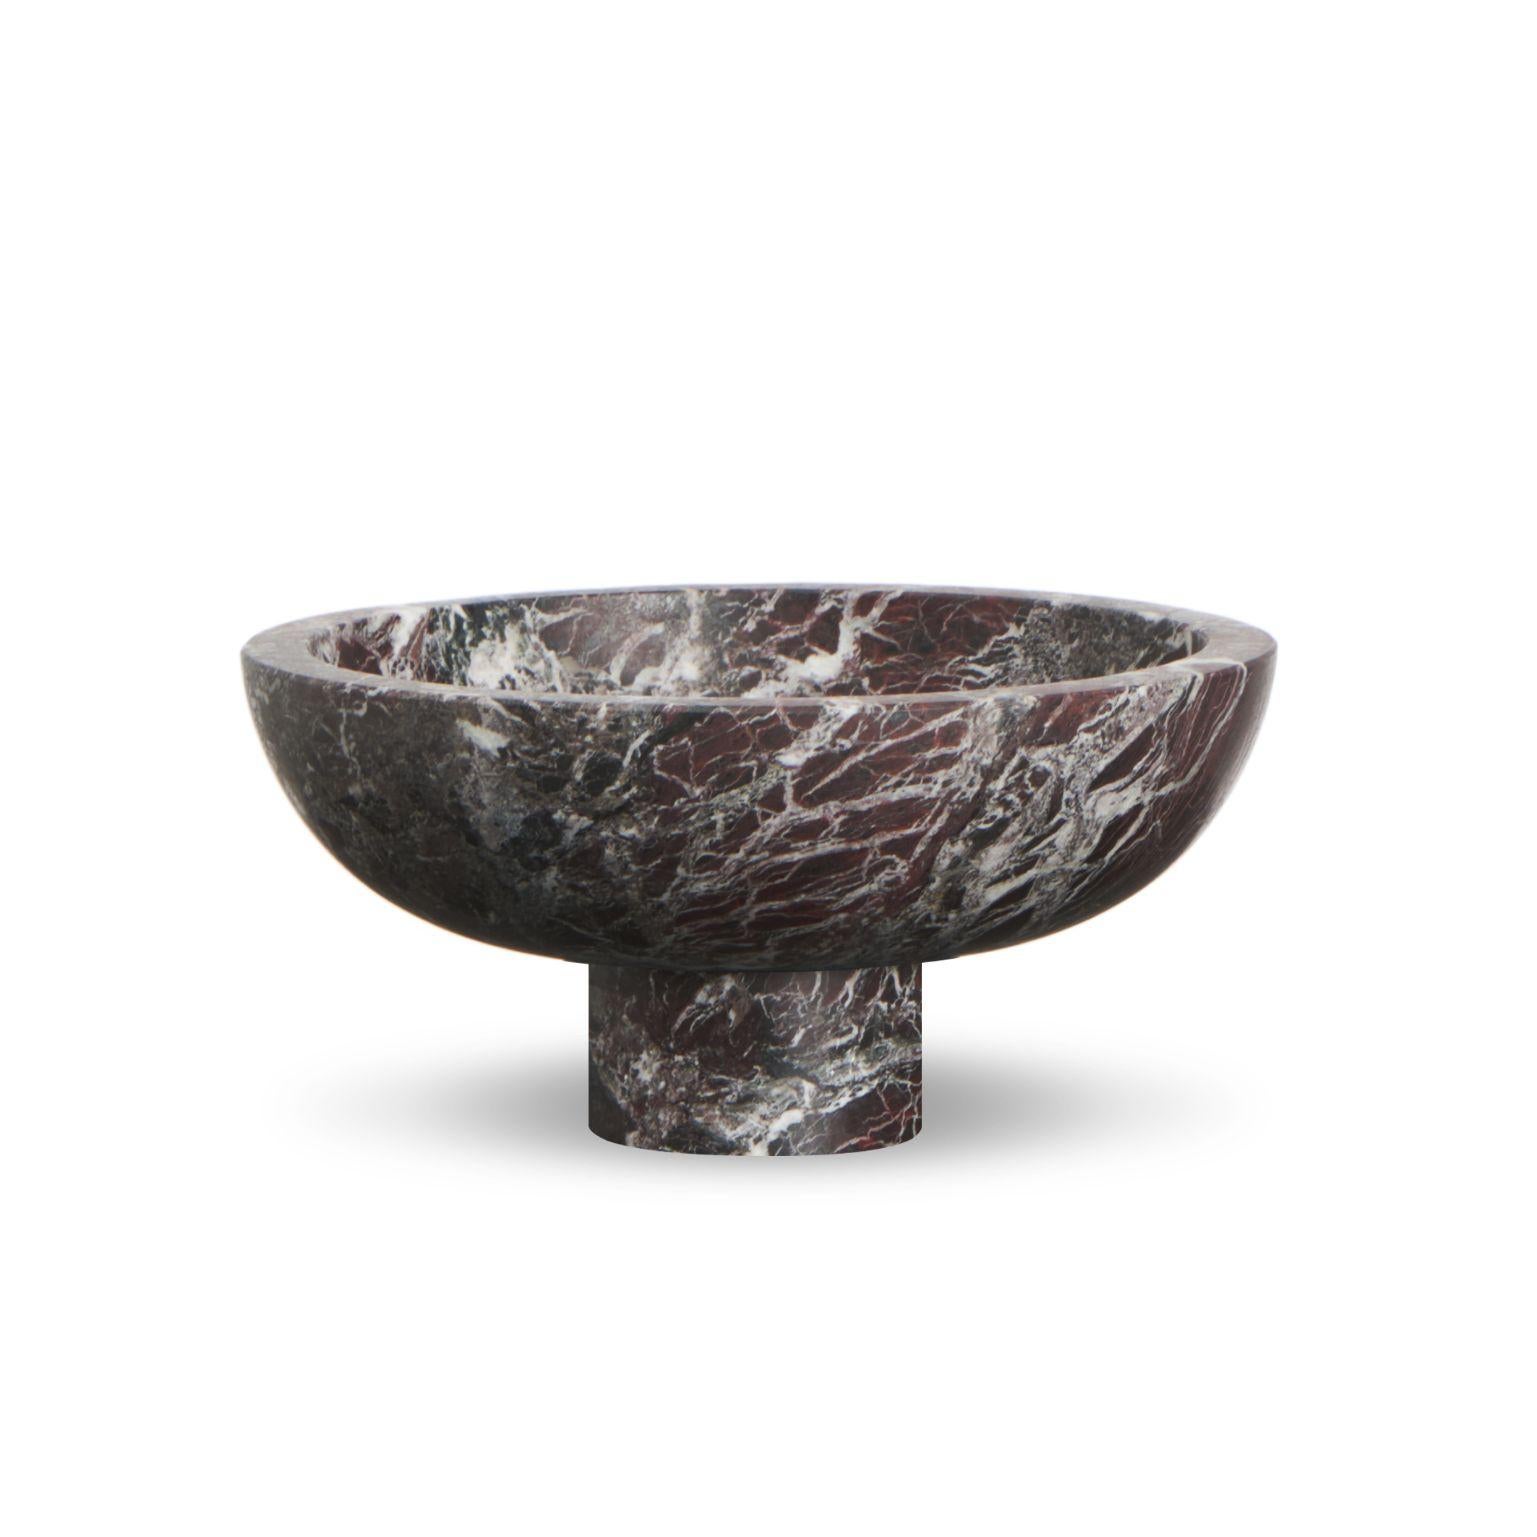 Contemporary Inside Out Bowl by Karen Chekerdjian For Sale